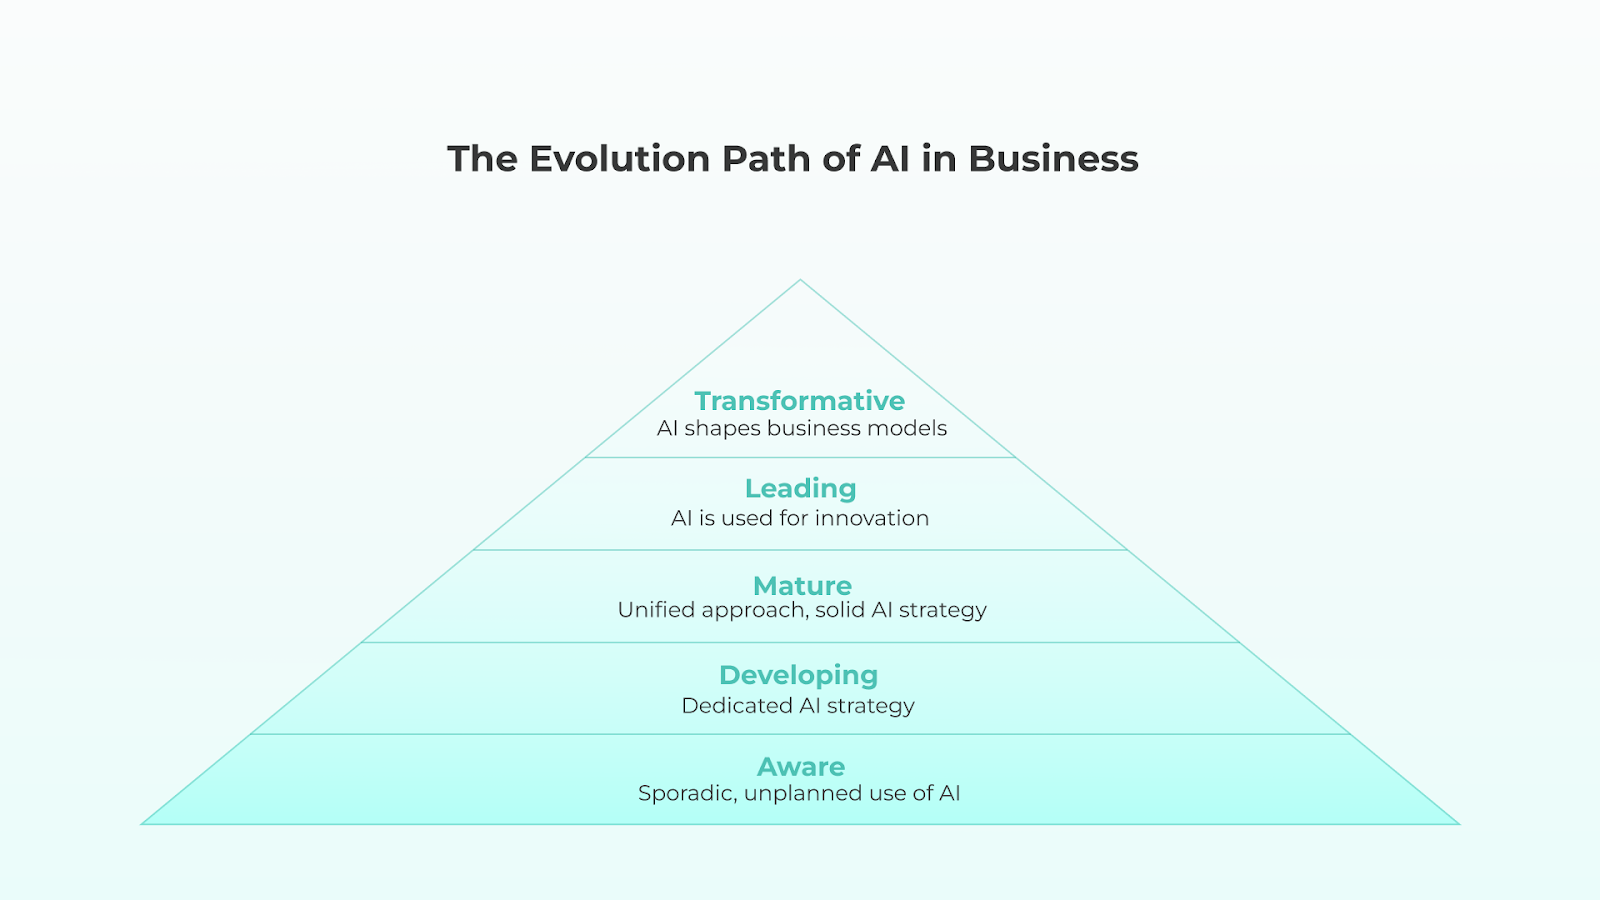 The Evolution Path of AI in Business: 5 Levels